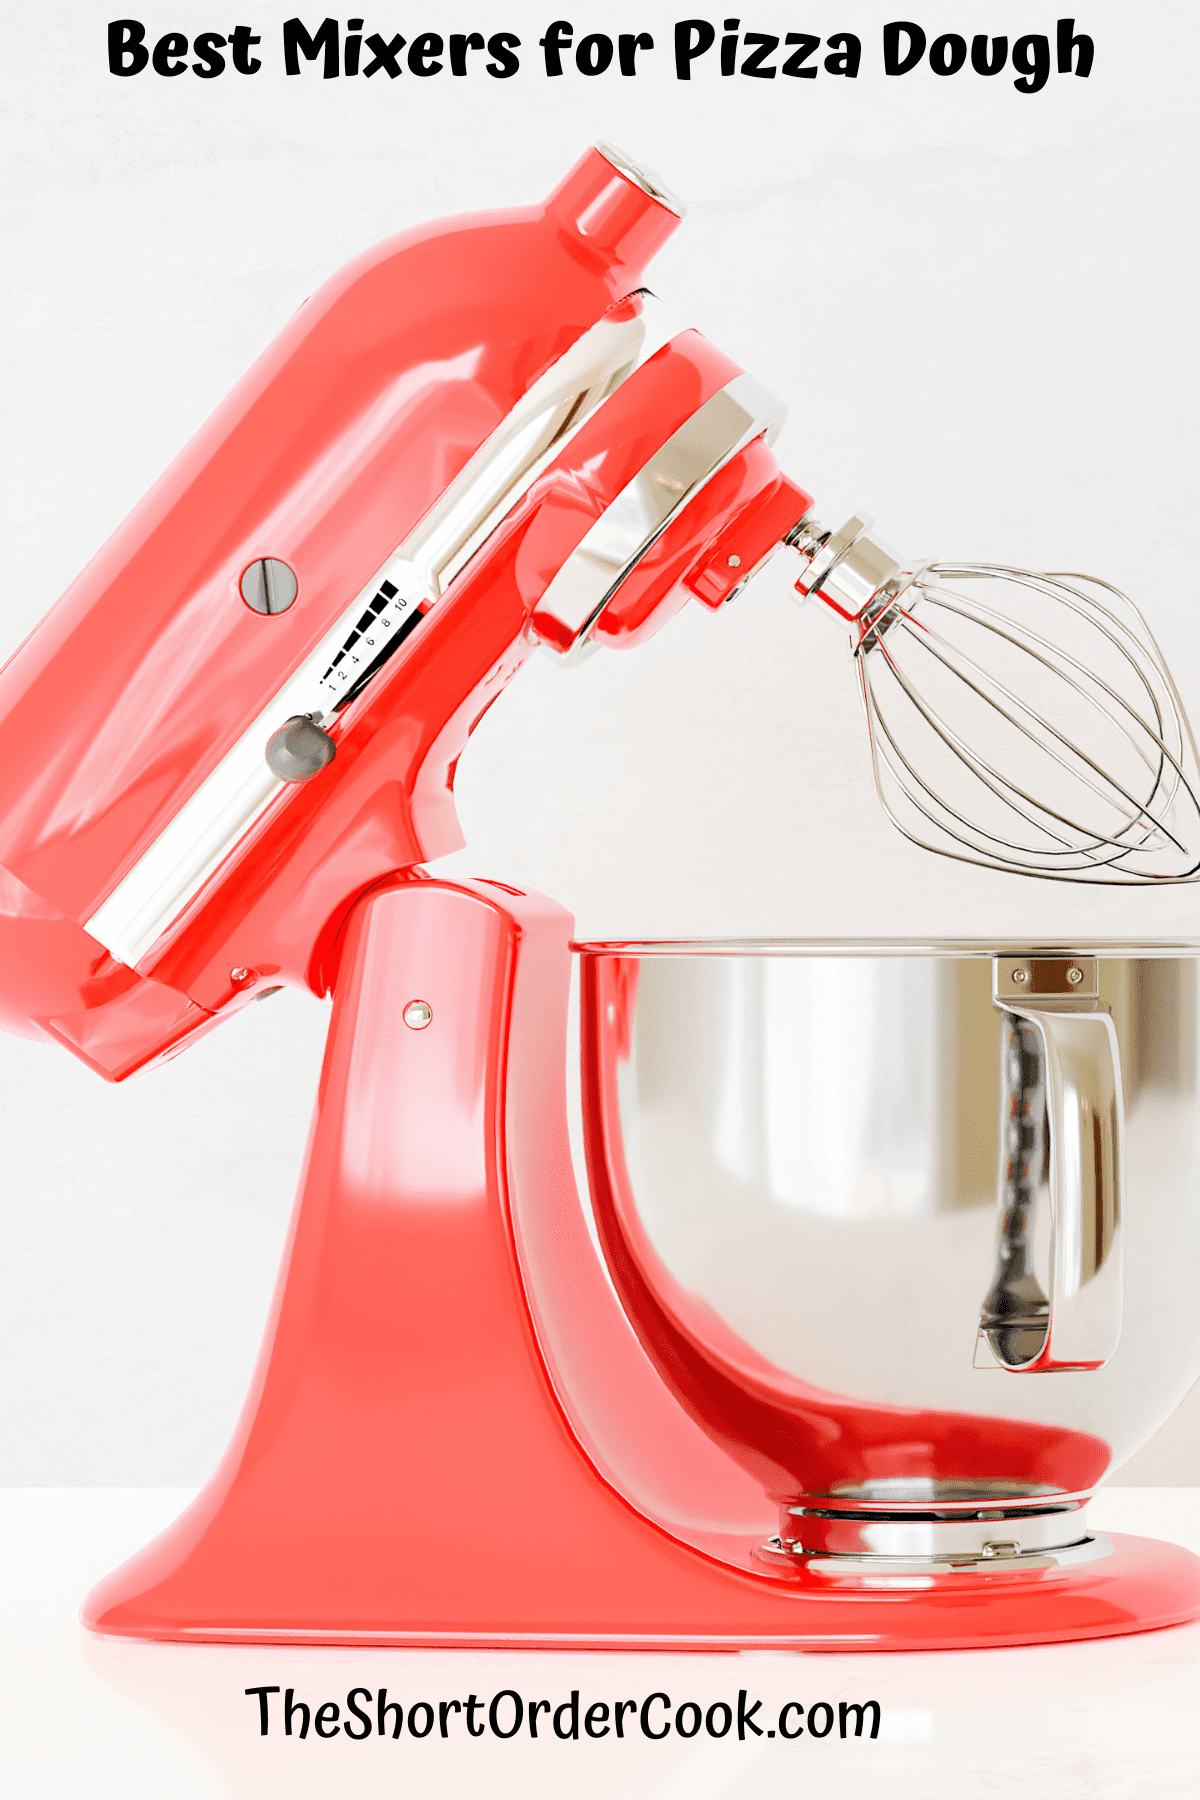 Red stand mixer ready to make pizza dough.